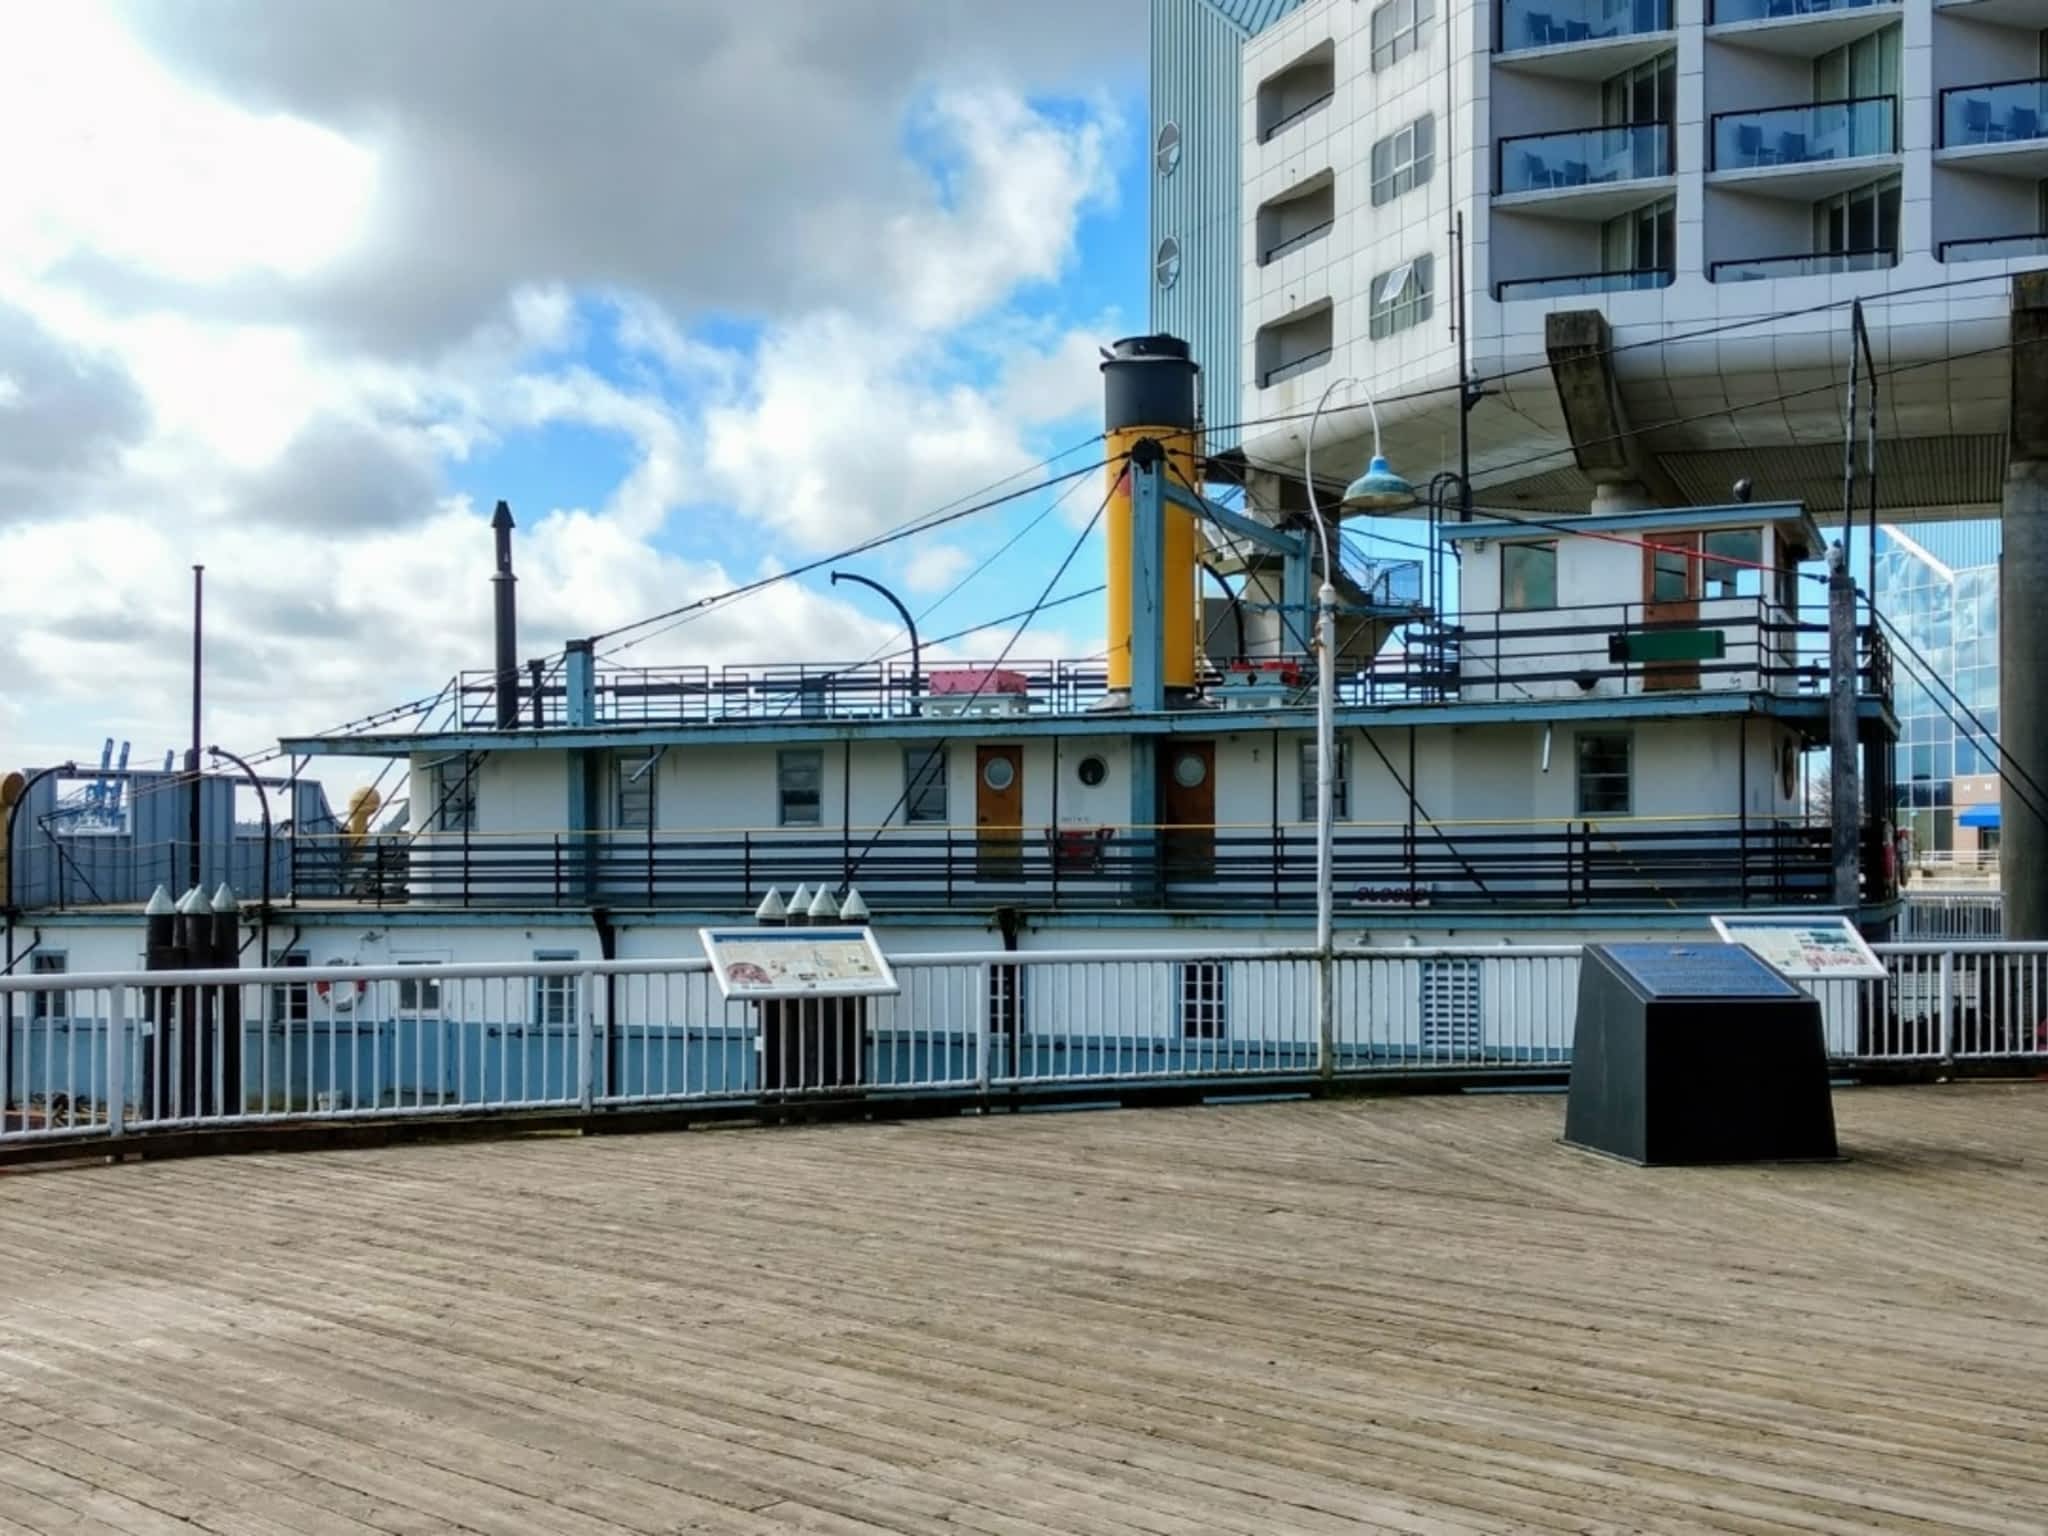 paddlewheeler riverboat tours new westminster bc